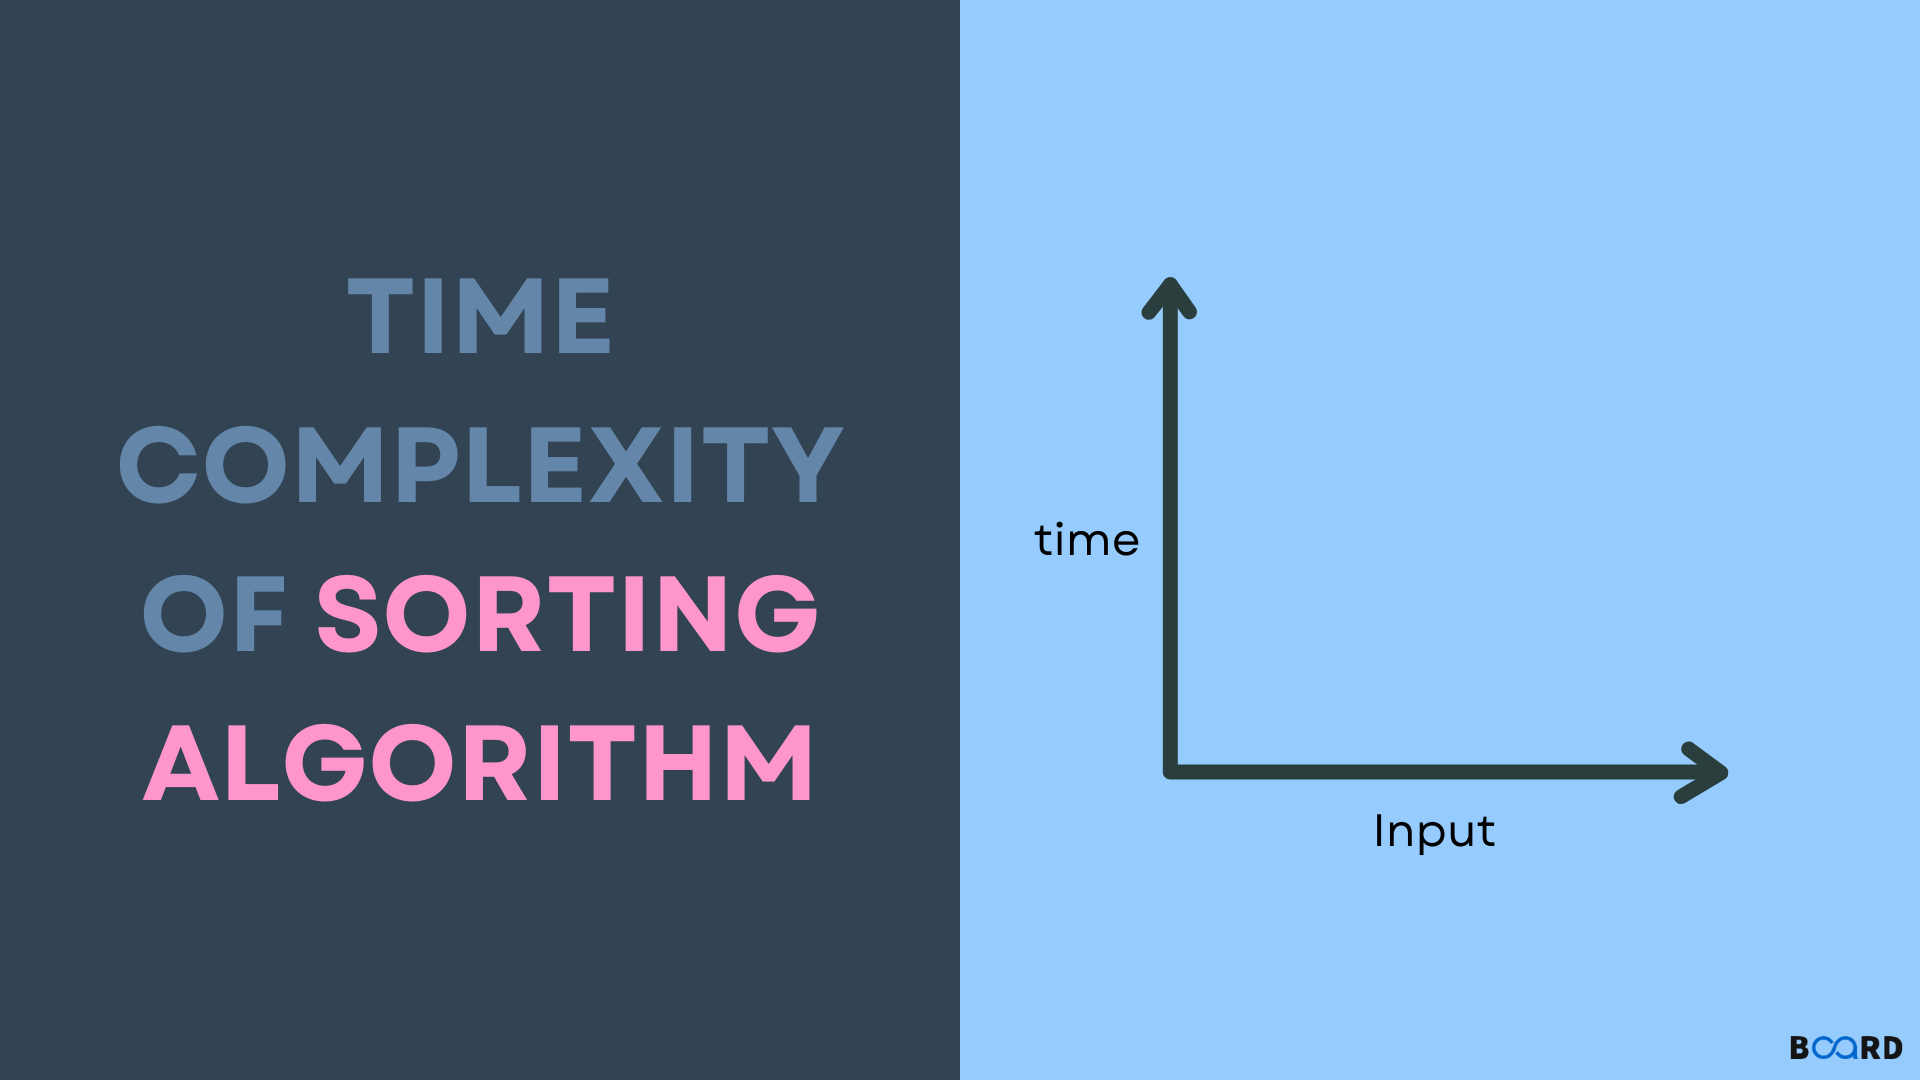 Time Complexity of Sorting Algorithms